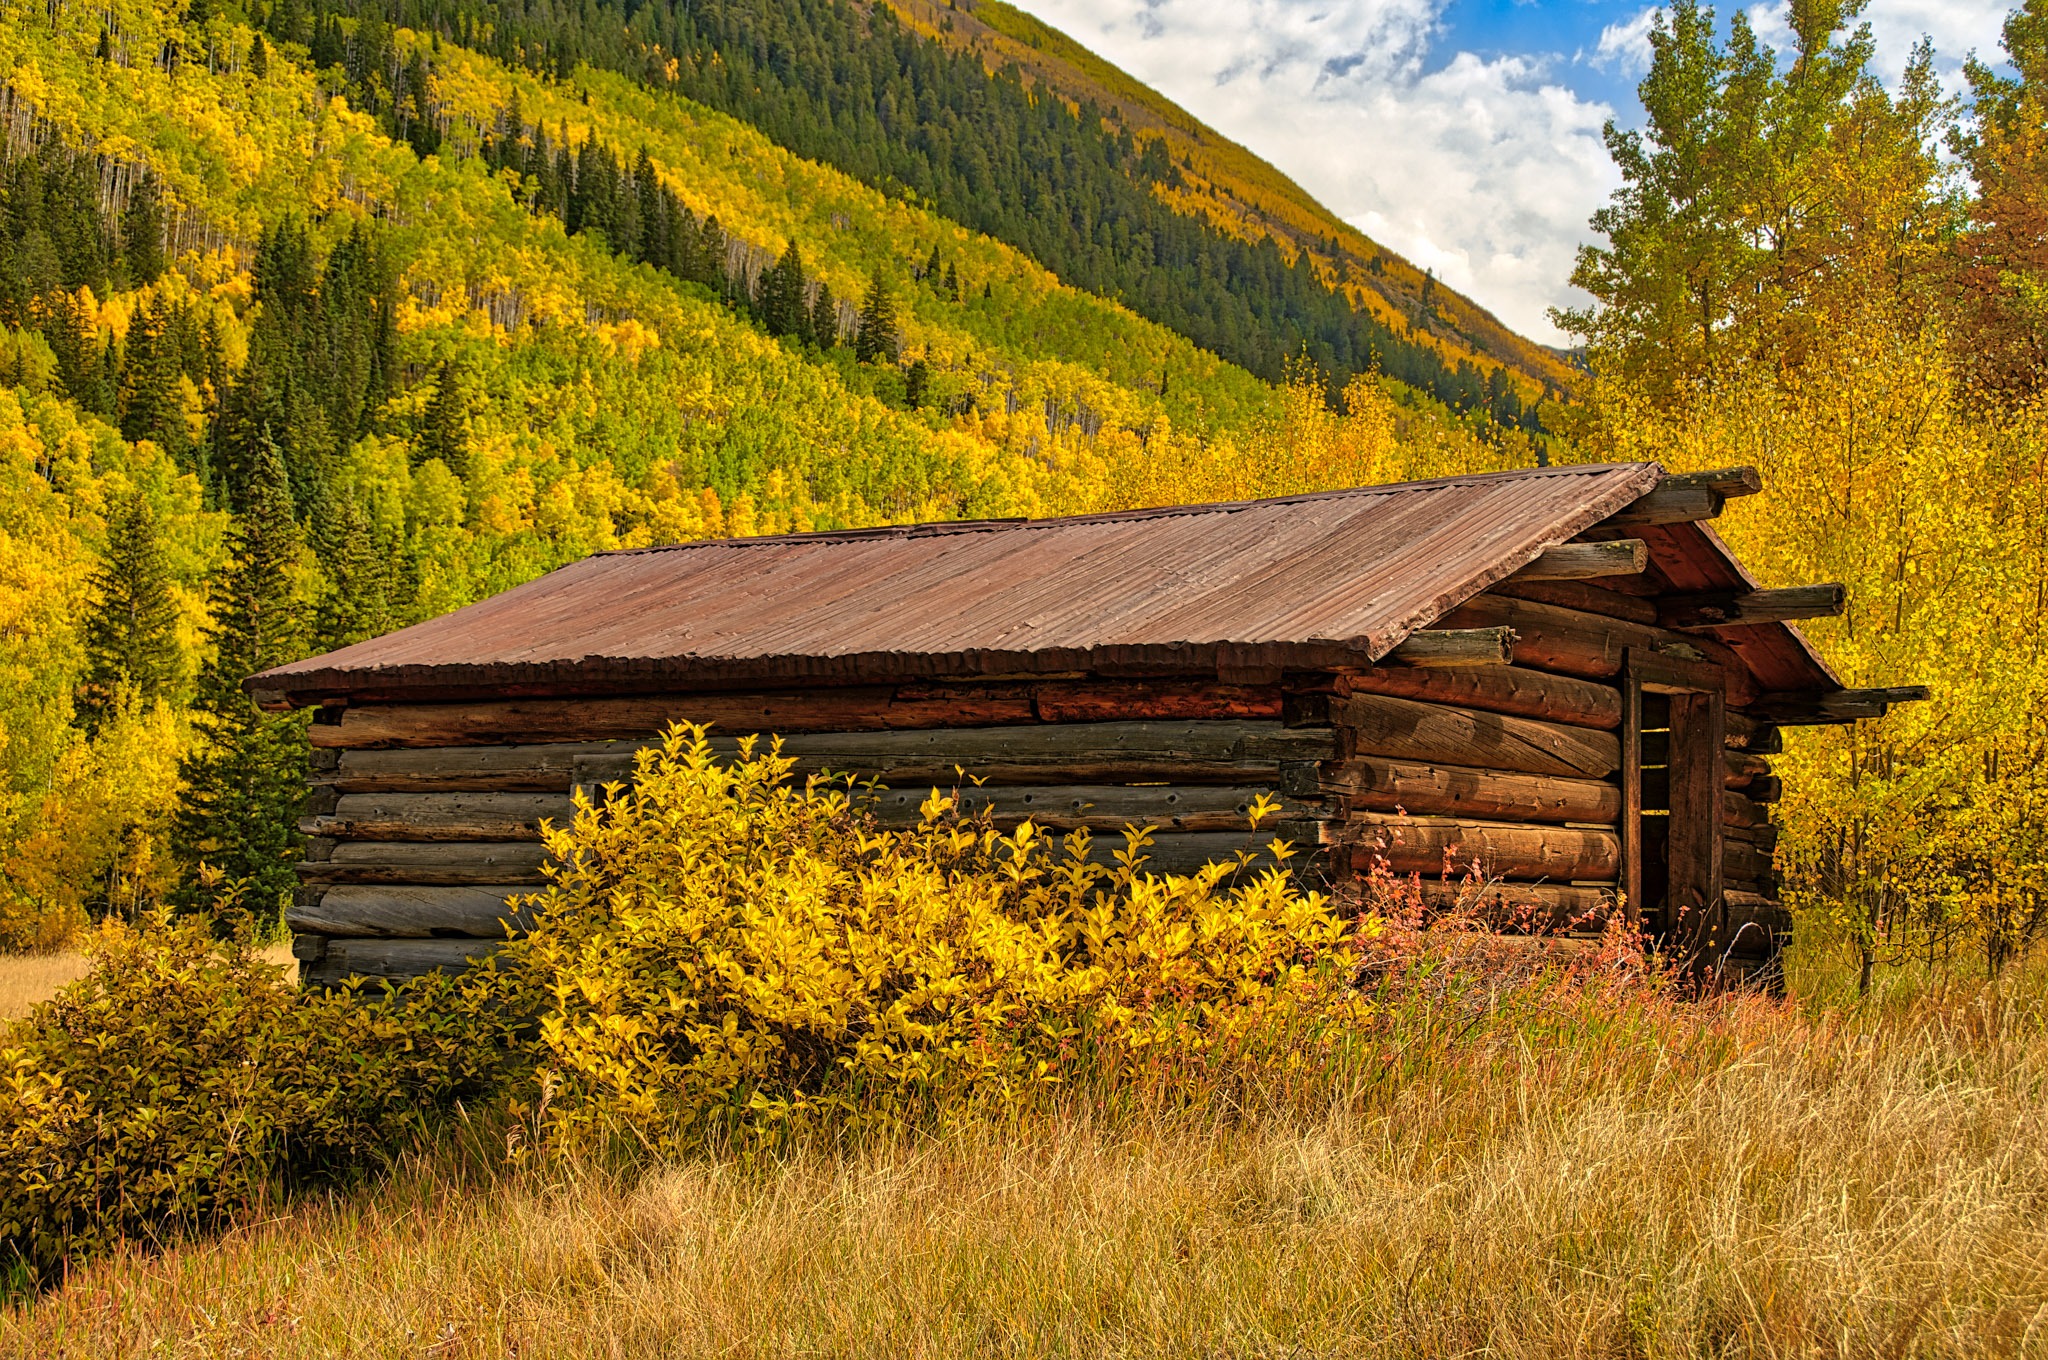 An abandoned miner's cabin in the ghost town of Ashcroft, Colorado, is framed by blazing aspens.